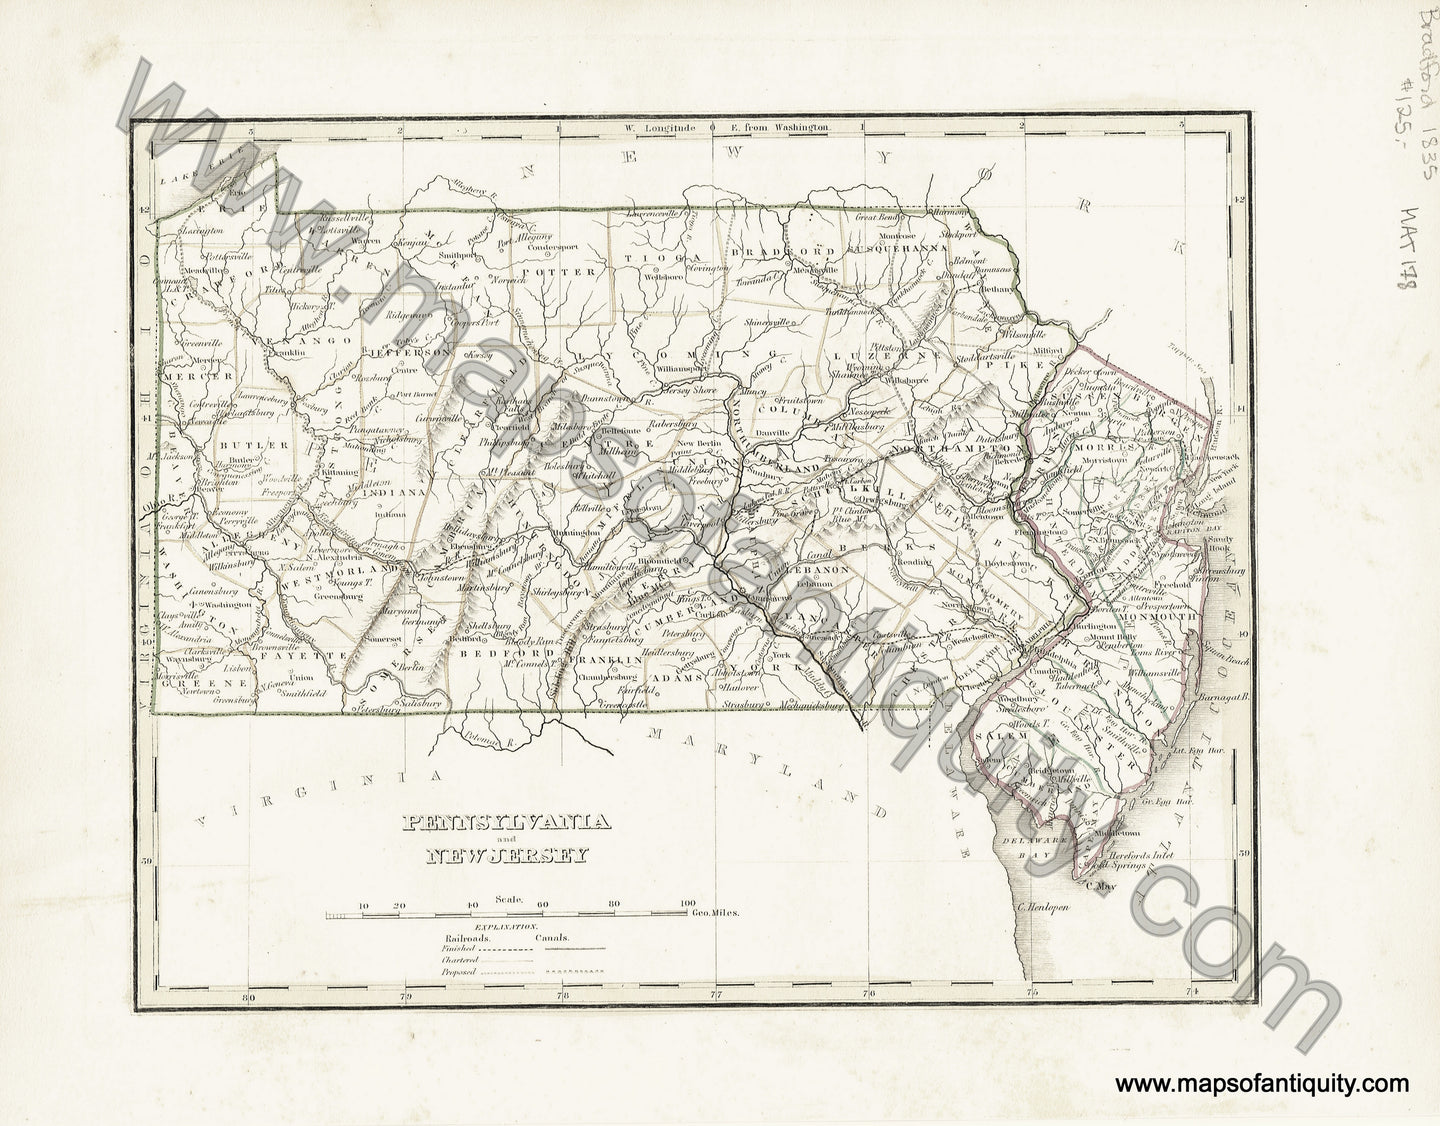 Antique-Hand-Colored-Map-Pennsylvania-and-New-Jersey-United-States--1835-T.G.-Bradford-Maps-Of-Antiquity